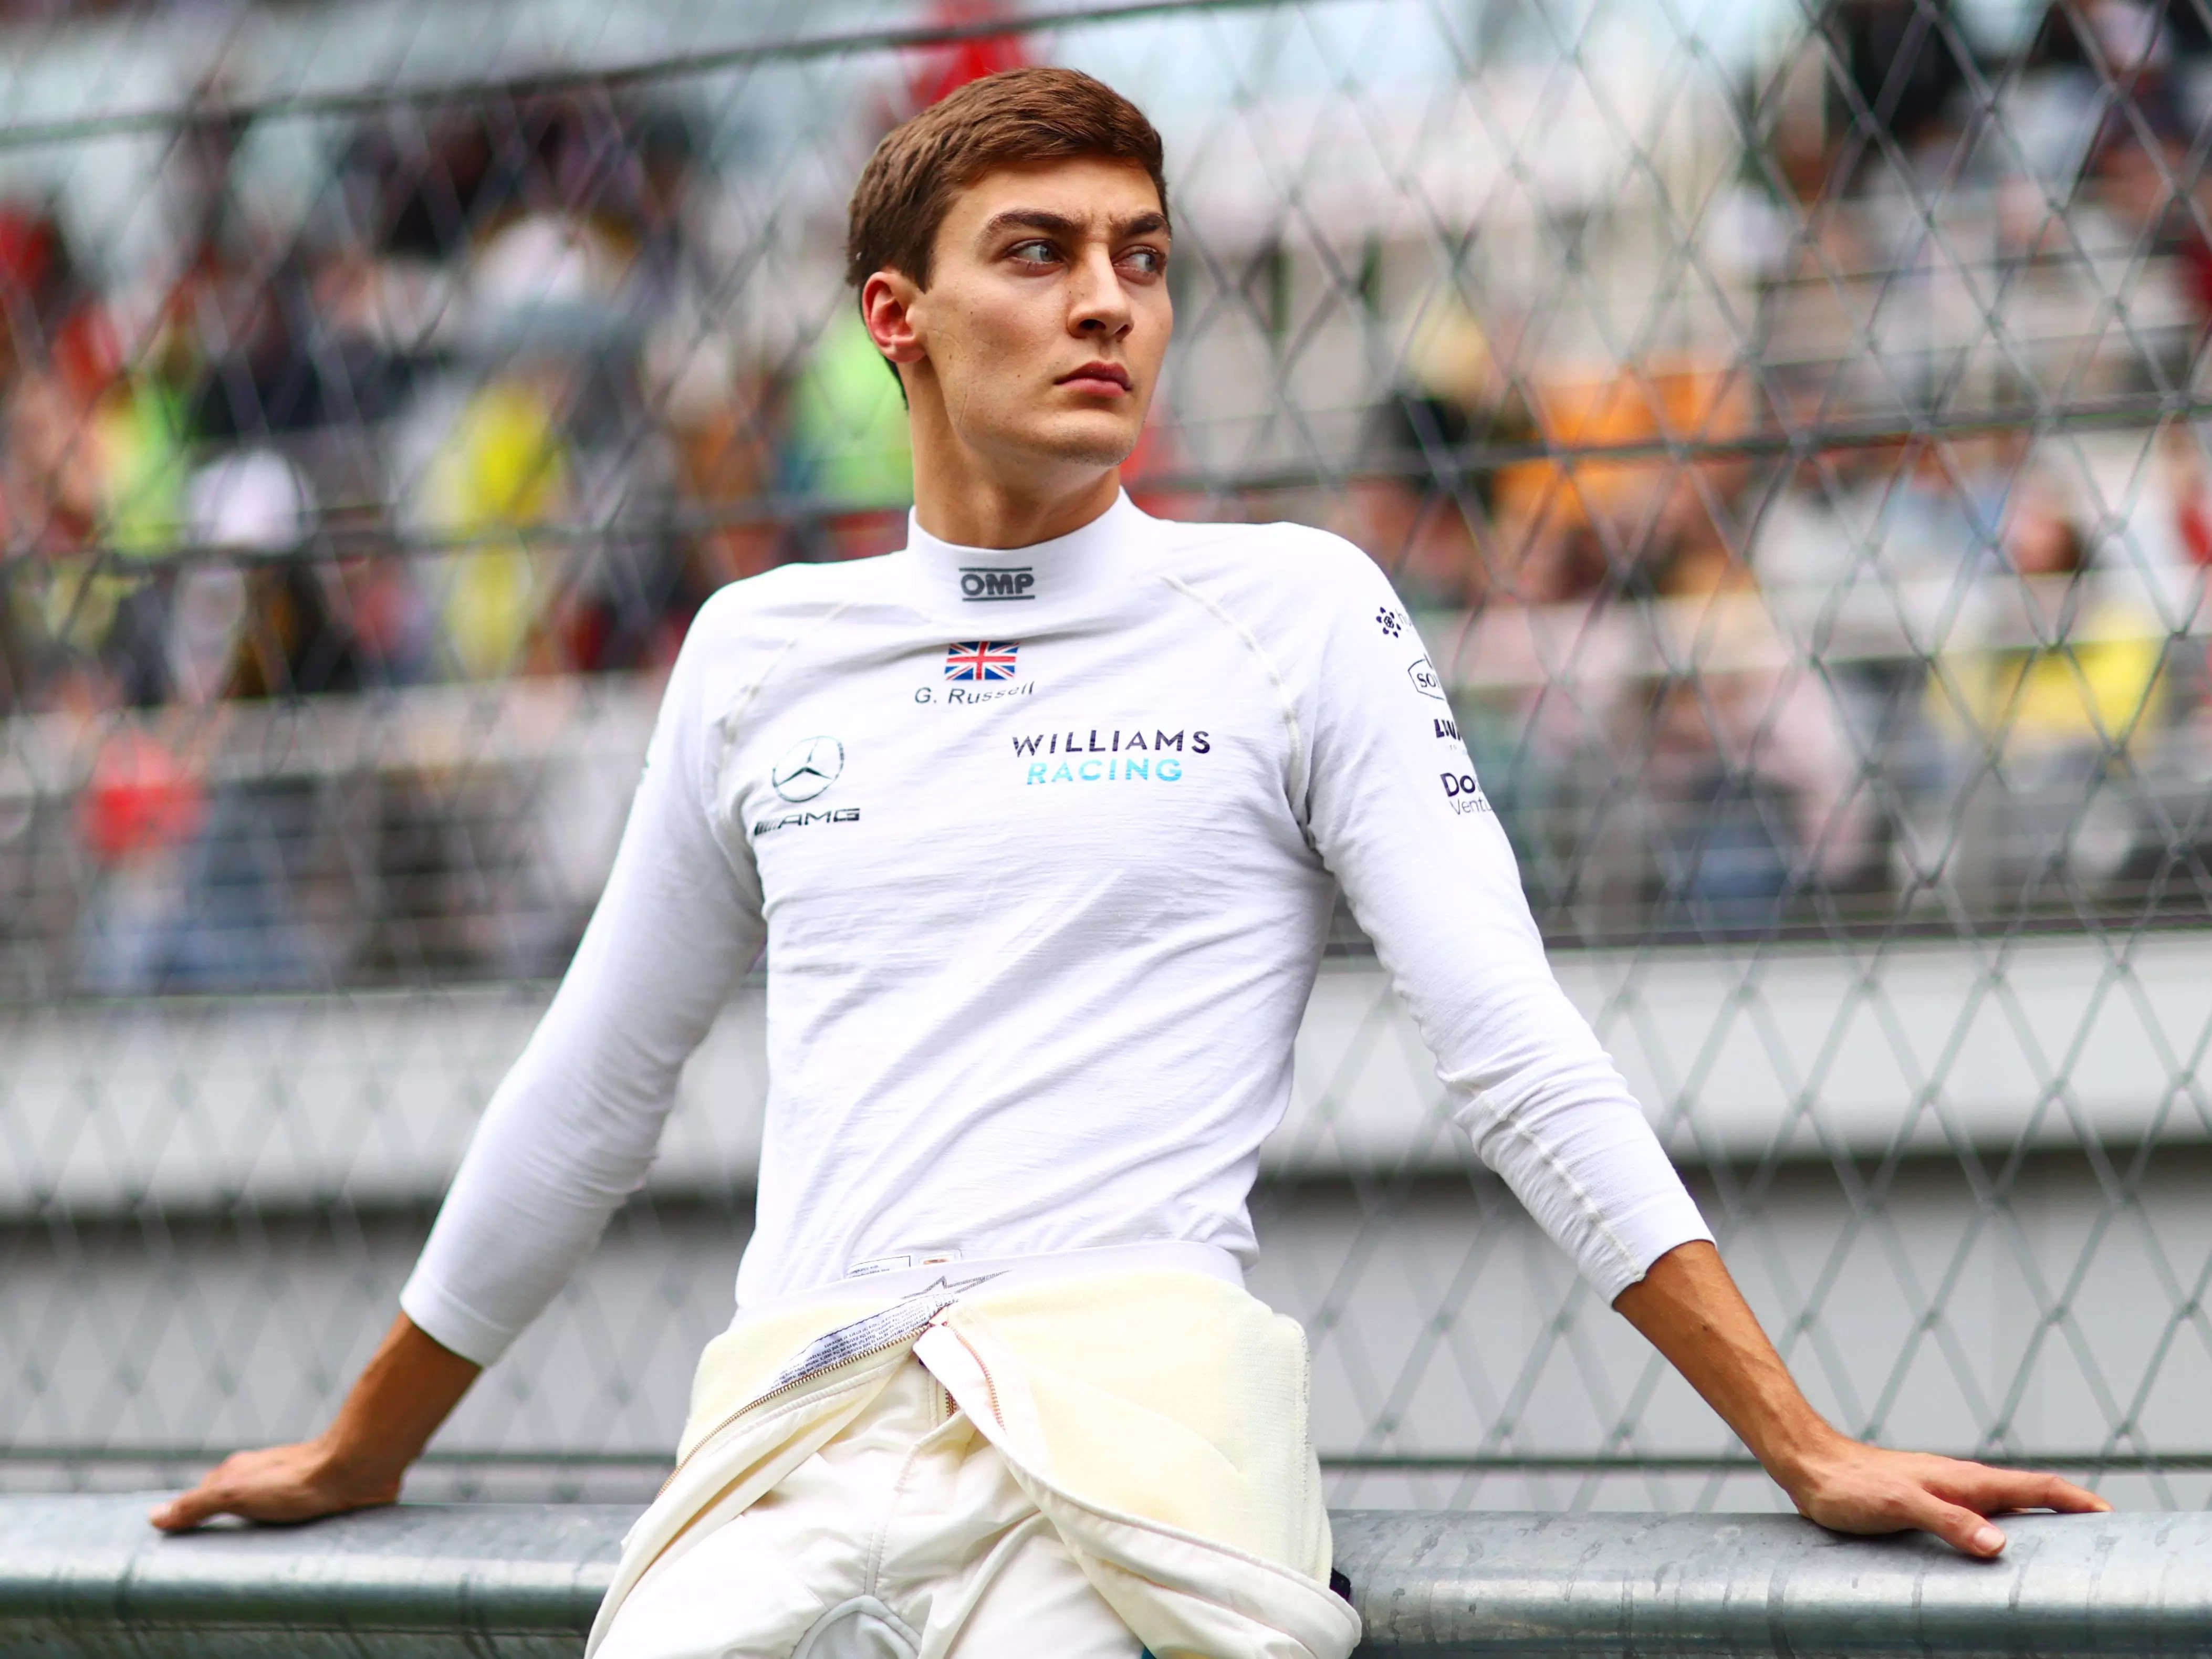 F1's hottest young prospect Russell discusses being more than